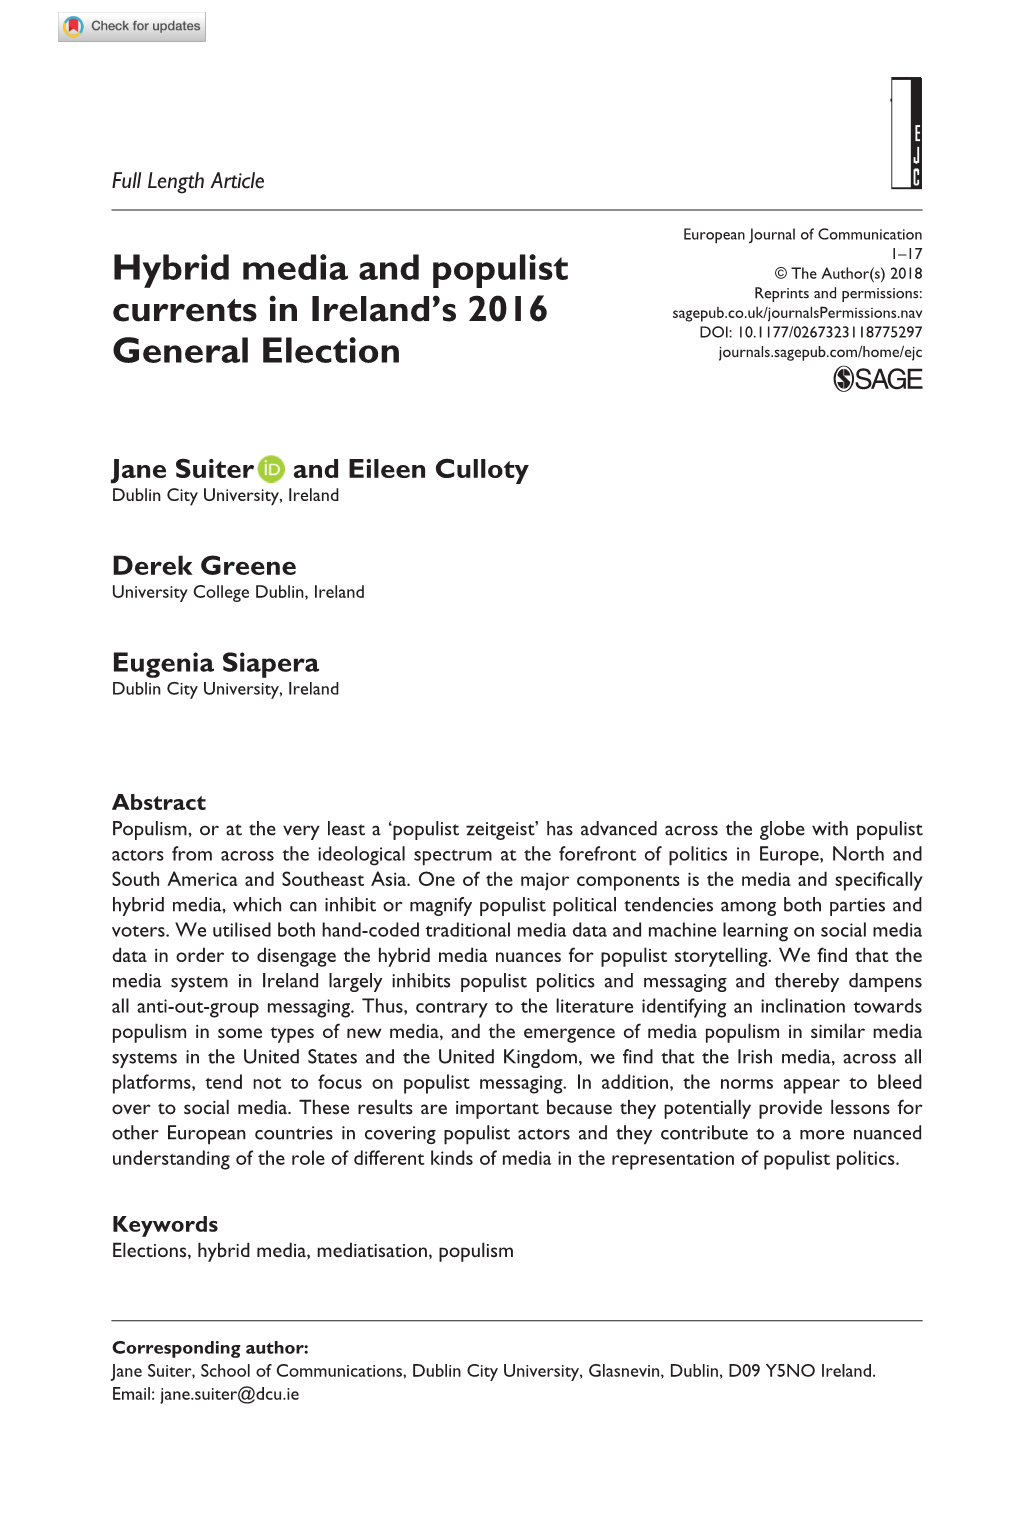 Hybrid Media and Populist Currents in Ireland's 2016 General Election